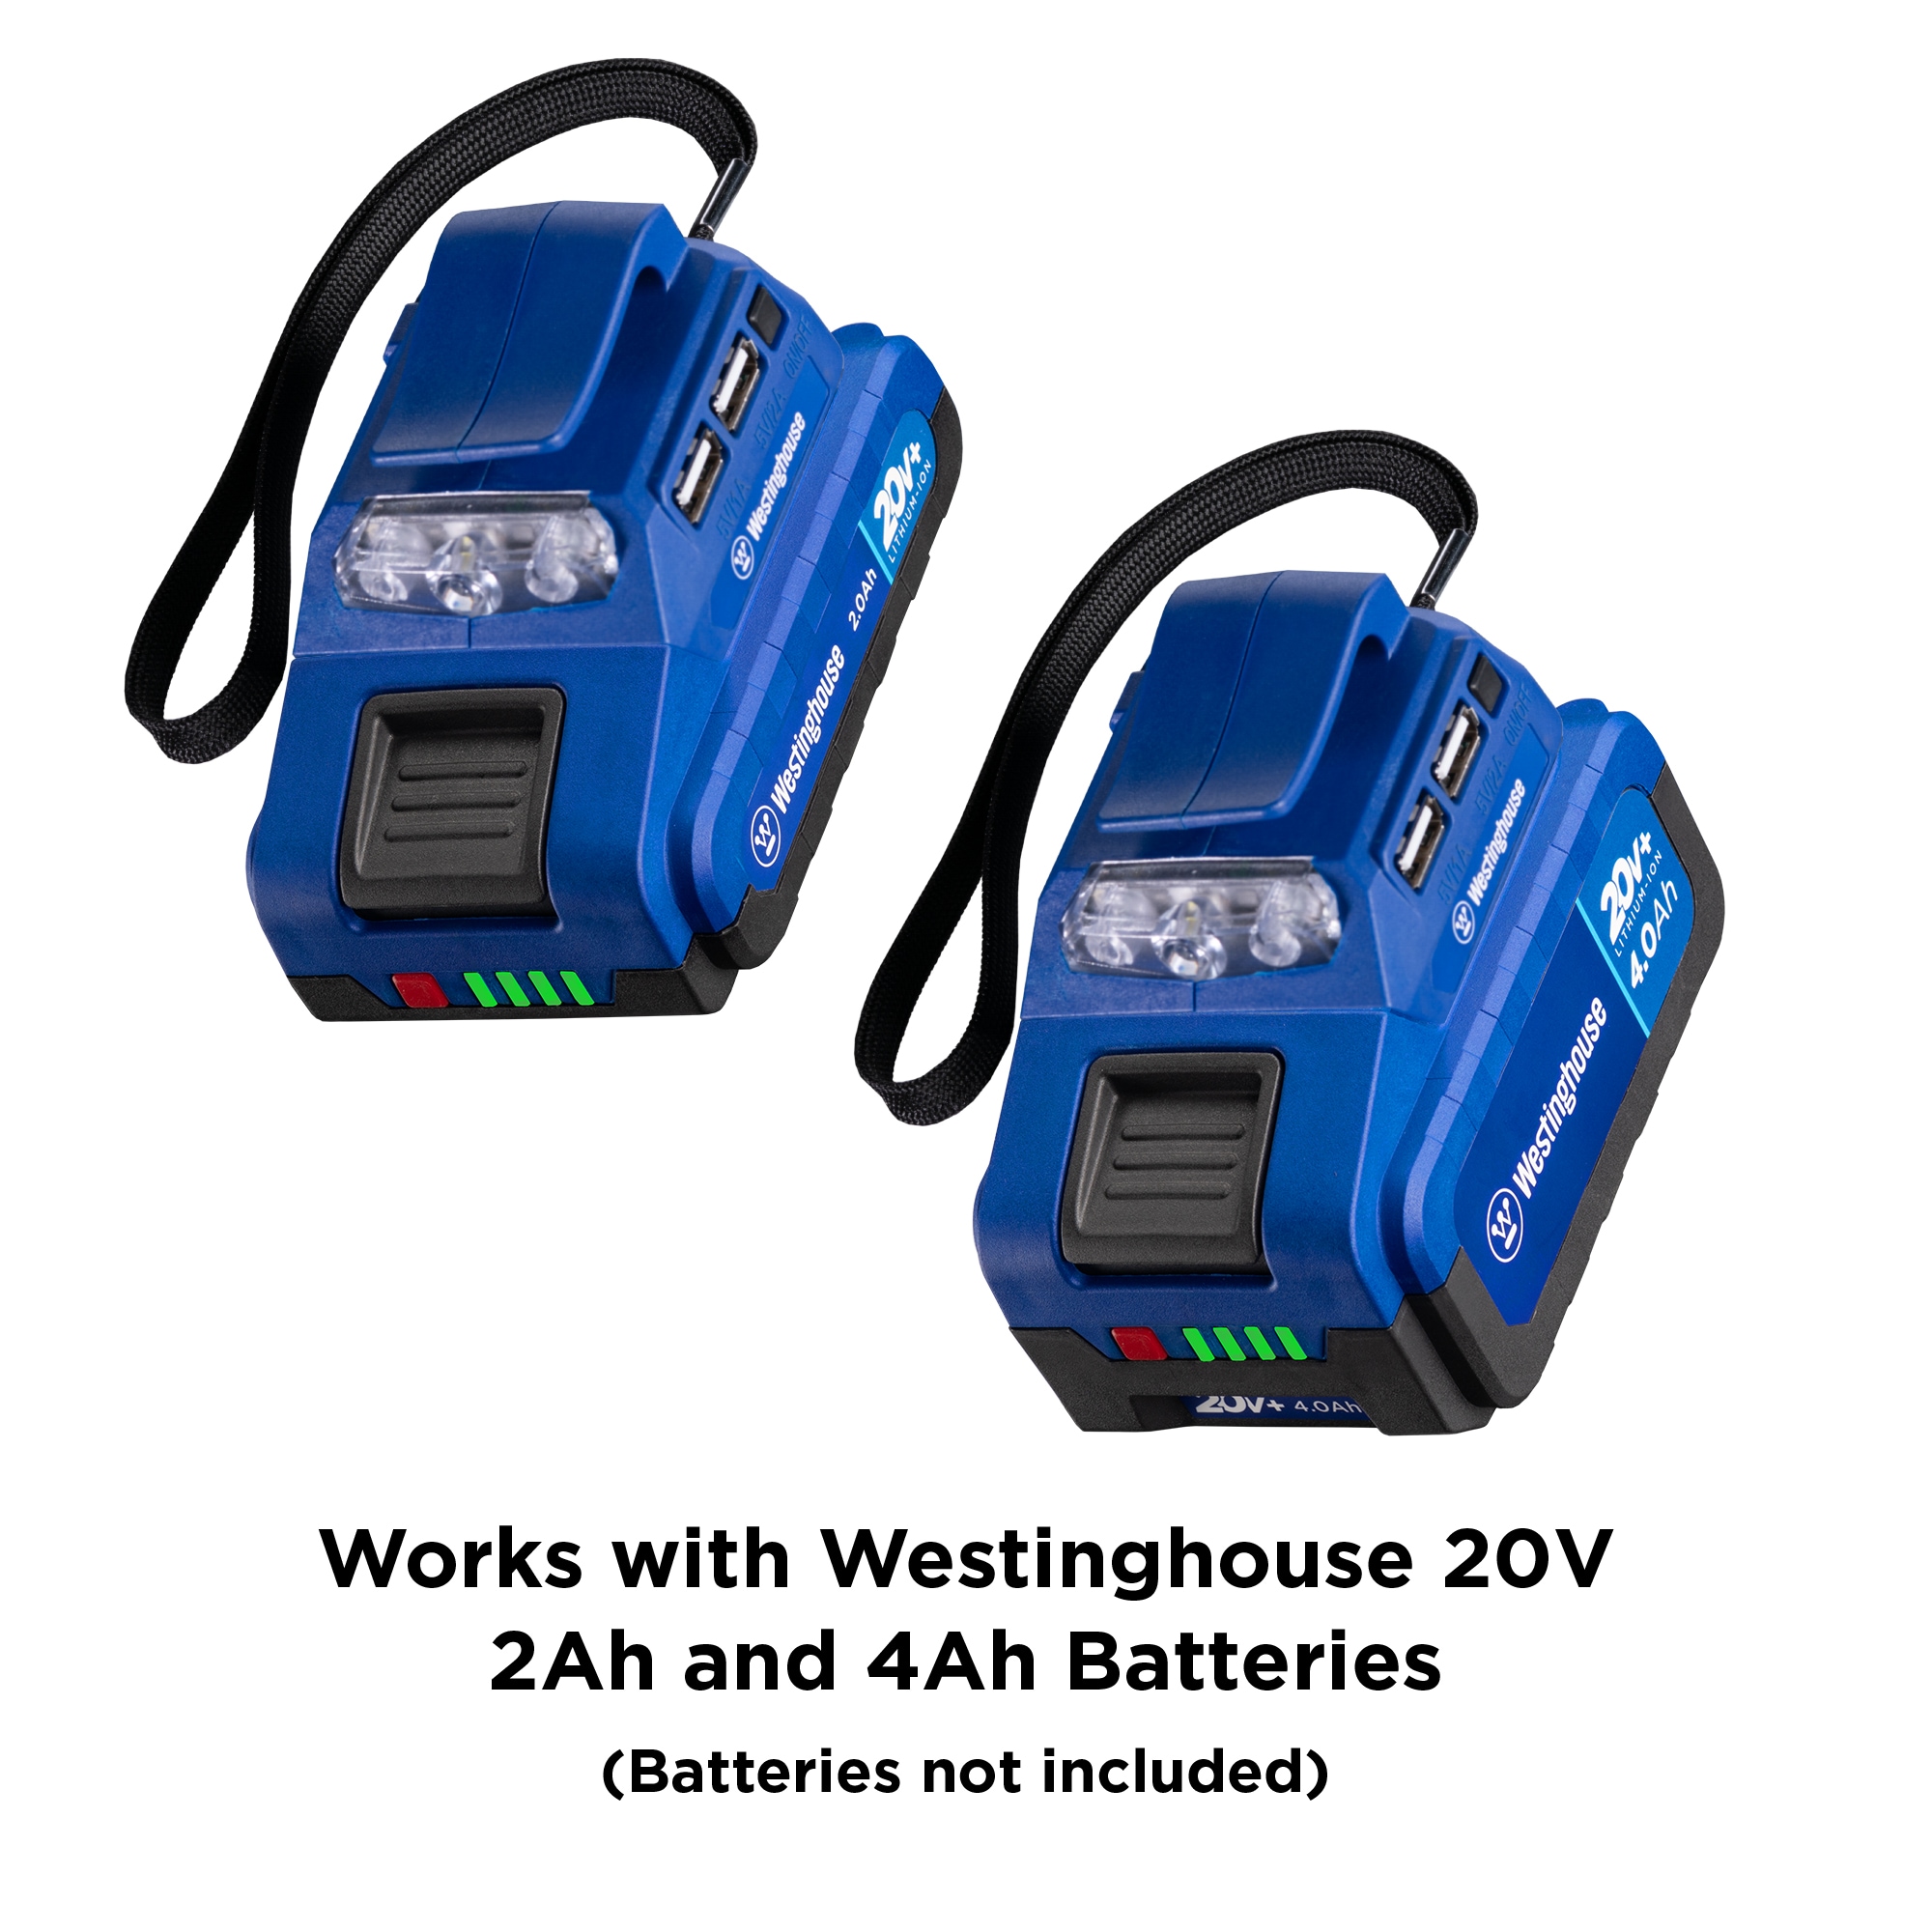 Westinghouse 20V Battery Flashlight and USB Outlet Accessory